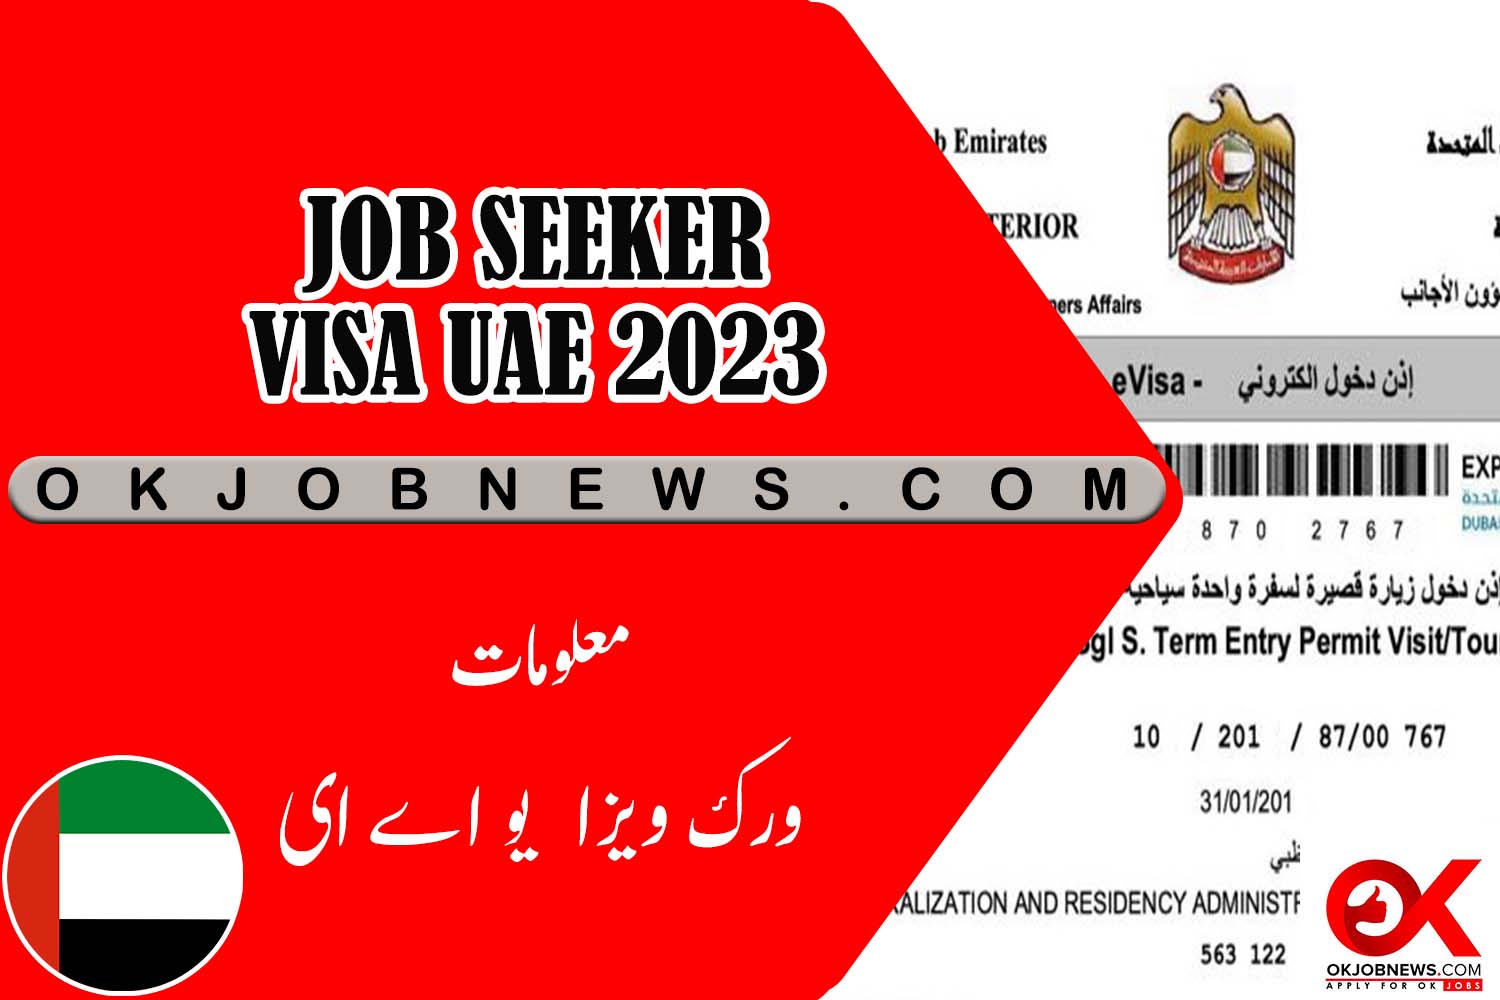 Everything You Need to Know About the Jobseeker Visa in UAE 2023